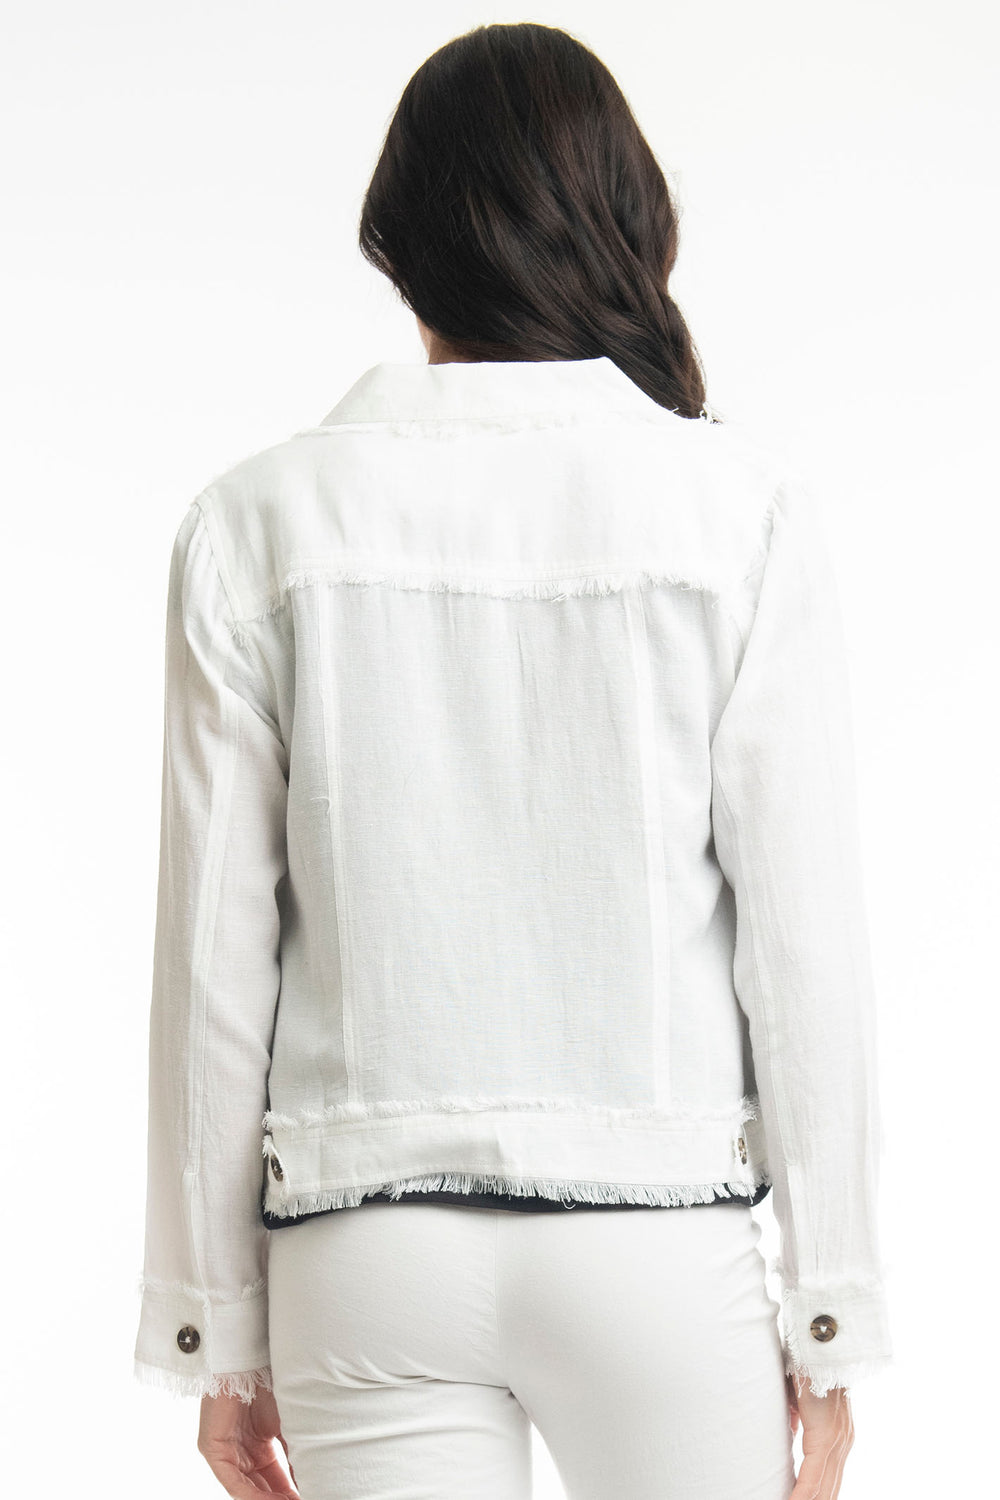 Orientique O62617 White Linen Frayed Edge Jacket - Experience Boutique